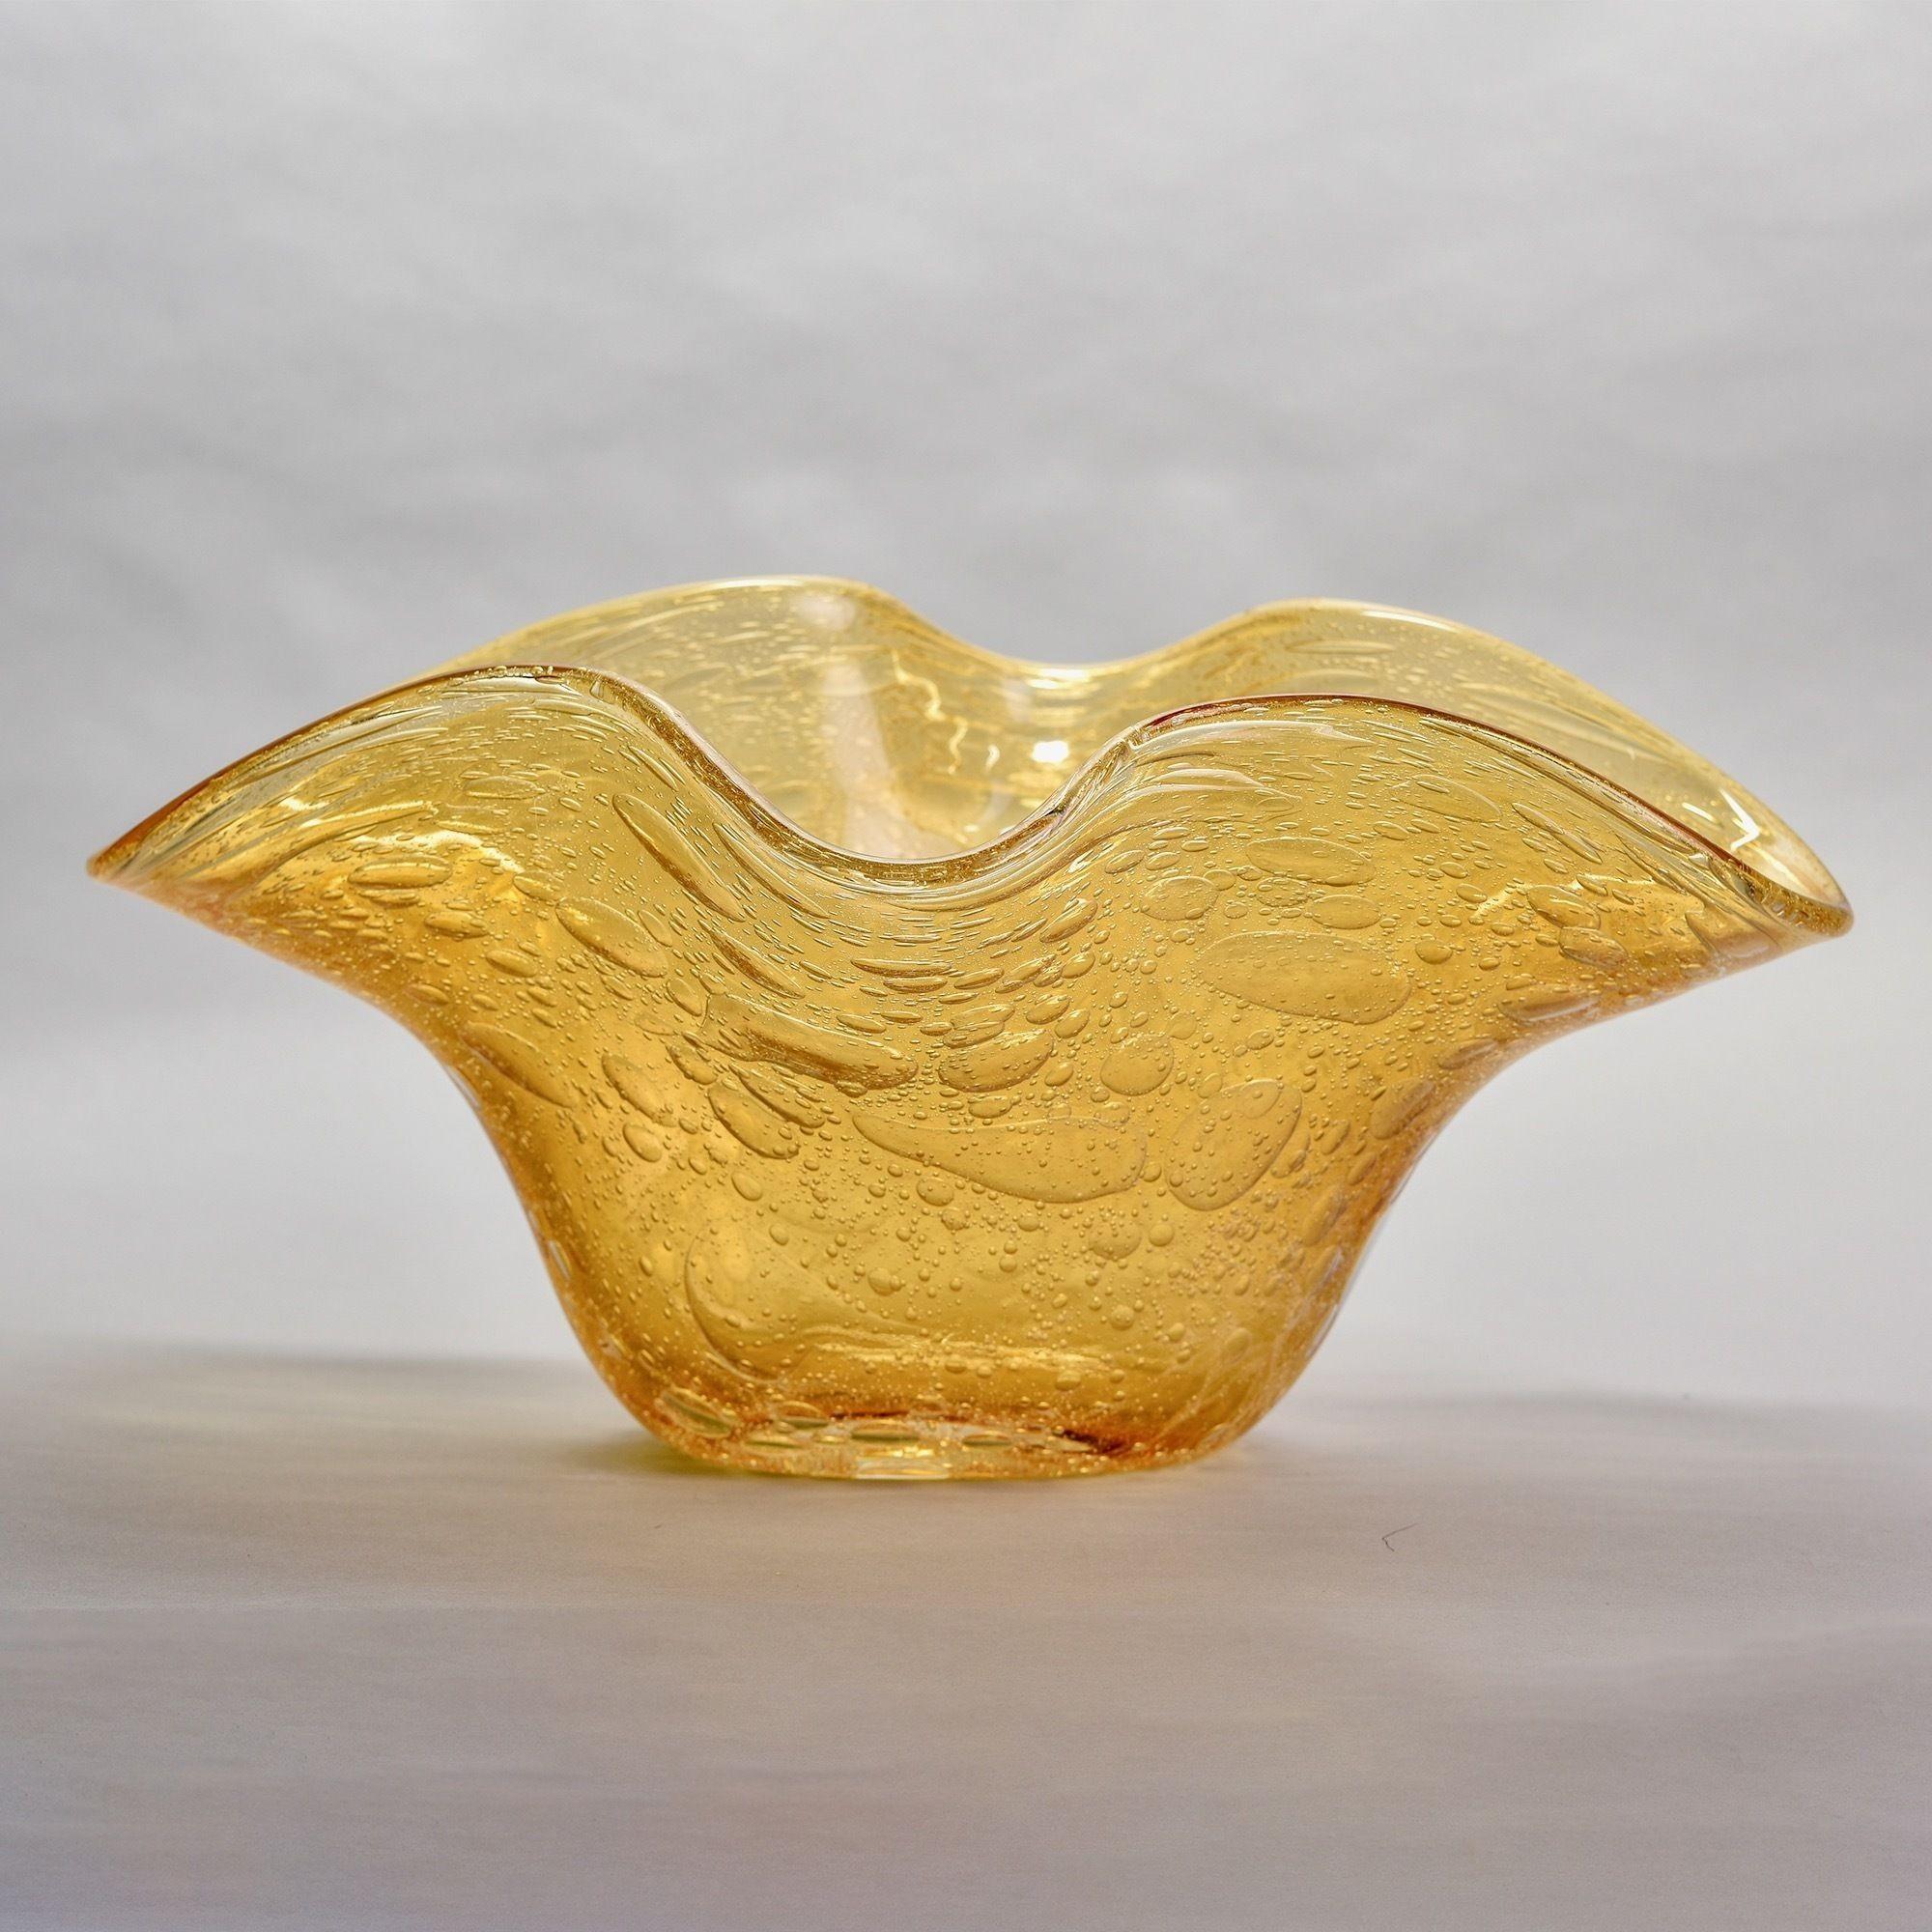 Circa 1990s extra large Murano glass bowl in a medium, warm gold tone is 20” wide and over 14” tall. Wavy rim and lots of internal air bubbles add visual flair. Original Murano label still affixed with glassworks code 036 which is Artigianato